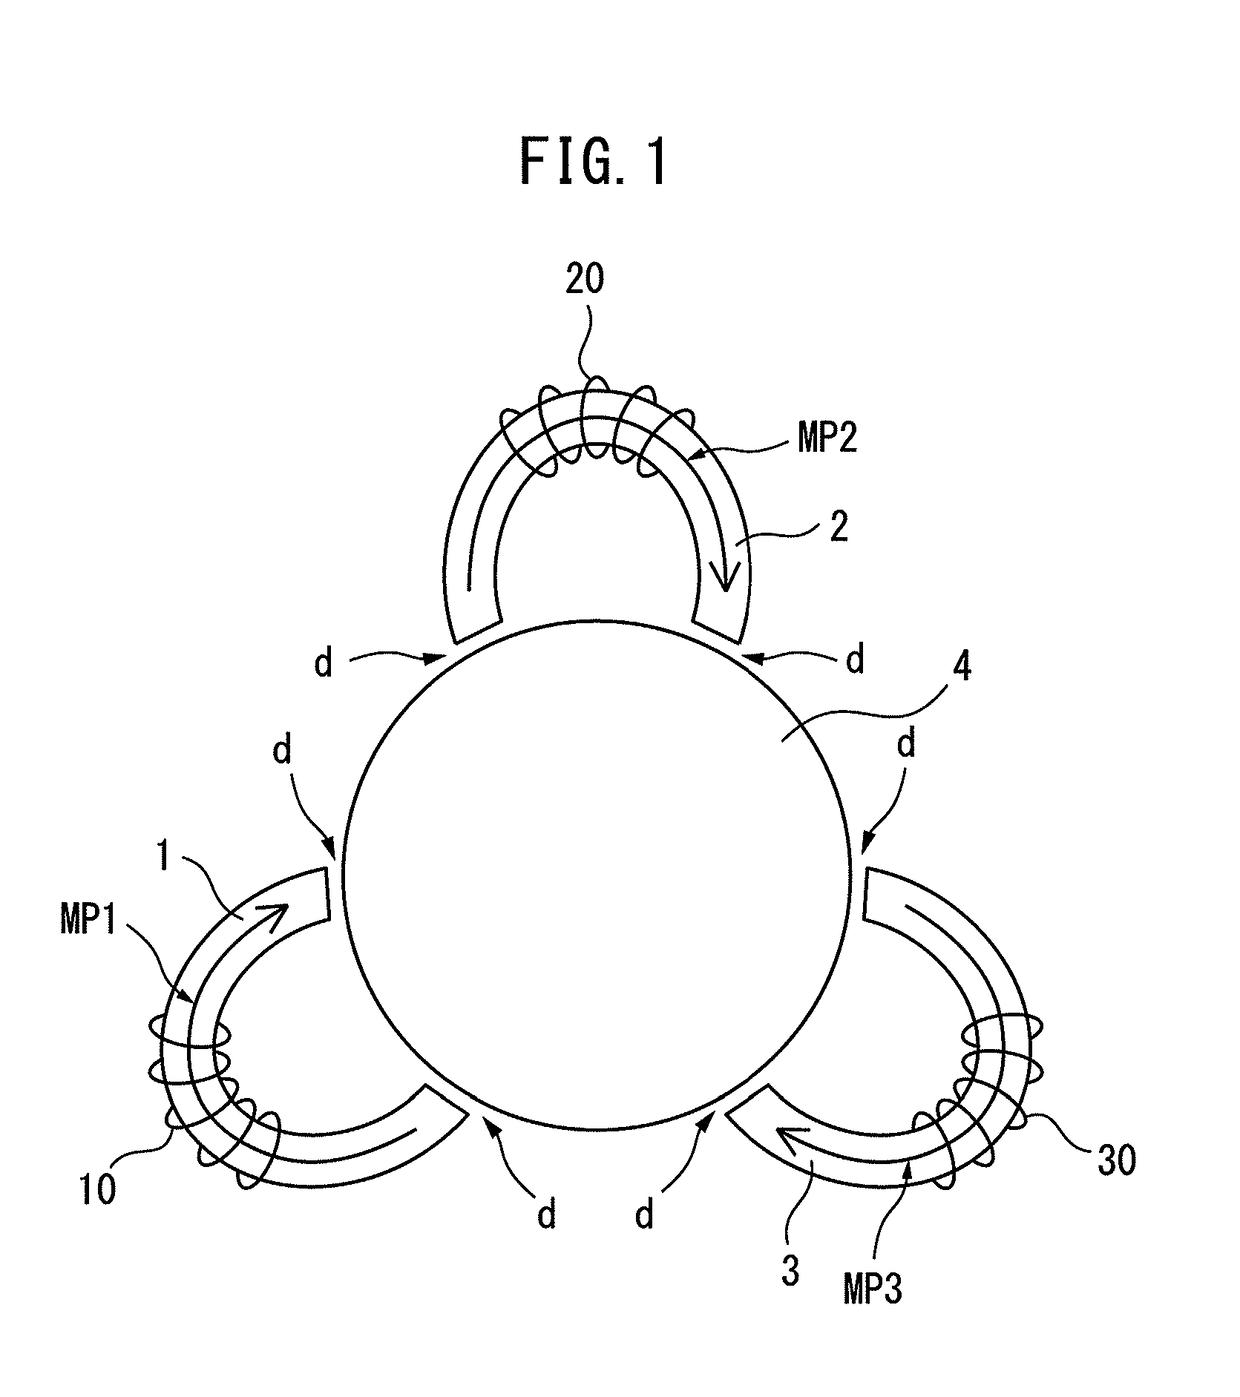 Multi-phase reactor capable of obtaining constant inductance for each phase